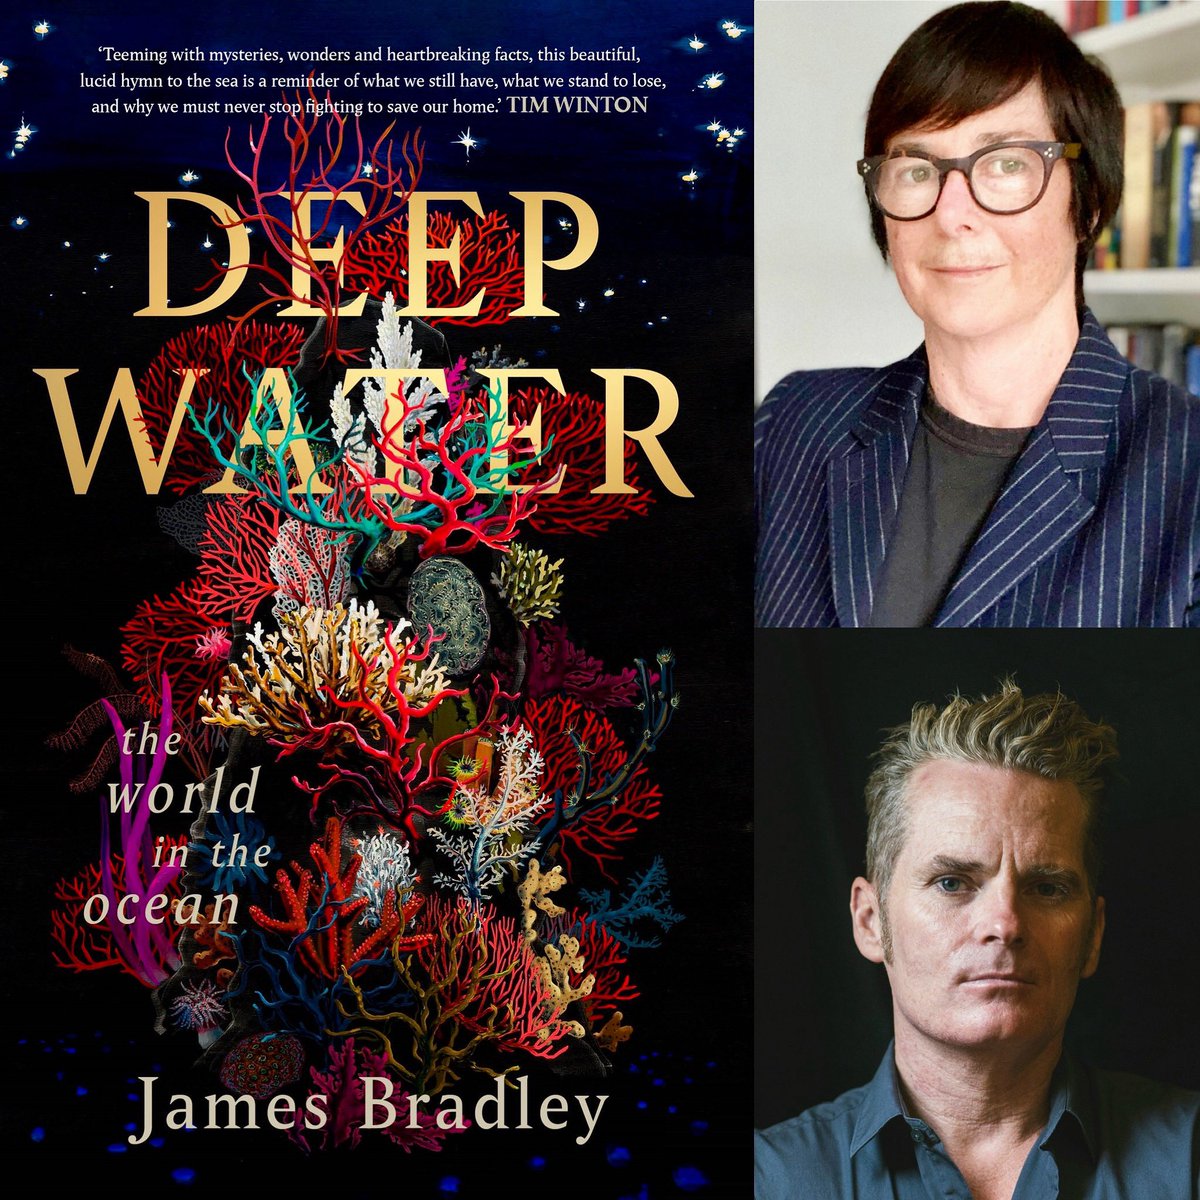 Today from 9am until noon on @3RRRFM! James Bradley (@ghostspecies) delves into his new book, Deep Water: The World in the Ocean, which explores the awe-inspiring life in our oceans – and its fight for survival. Professor @c_s_wallace talks all things UK politics and #auspol